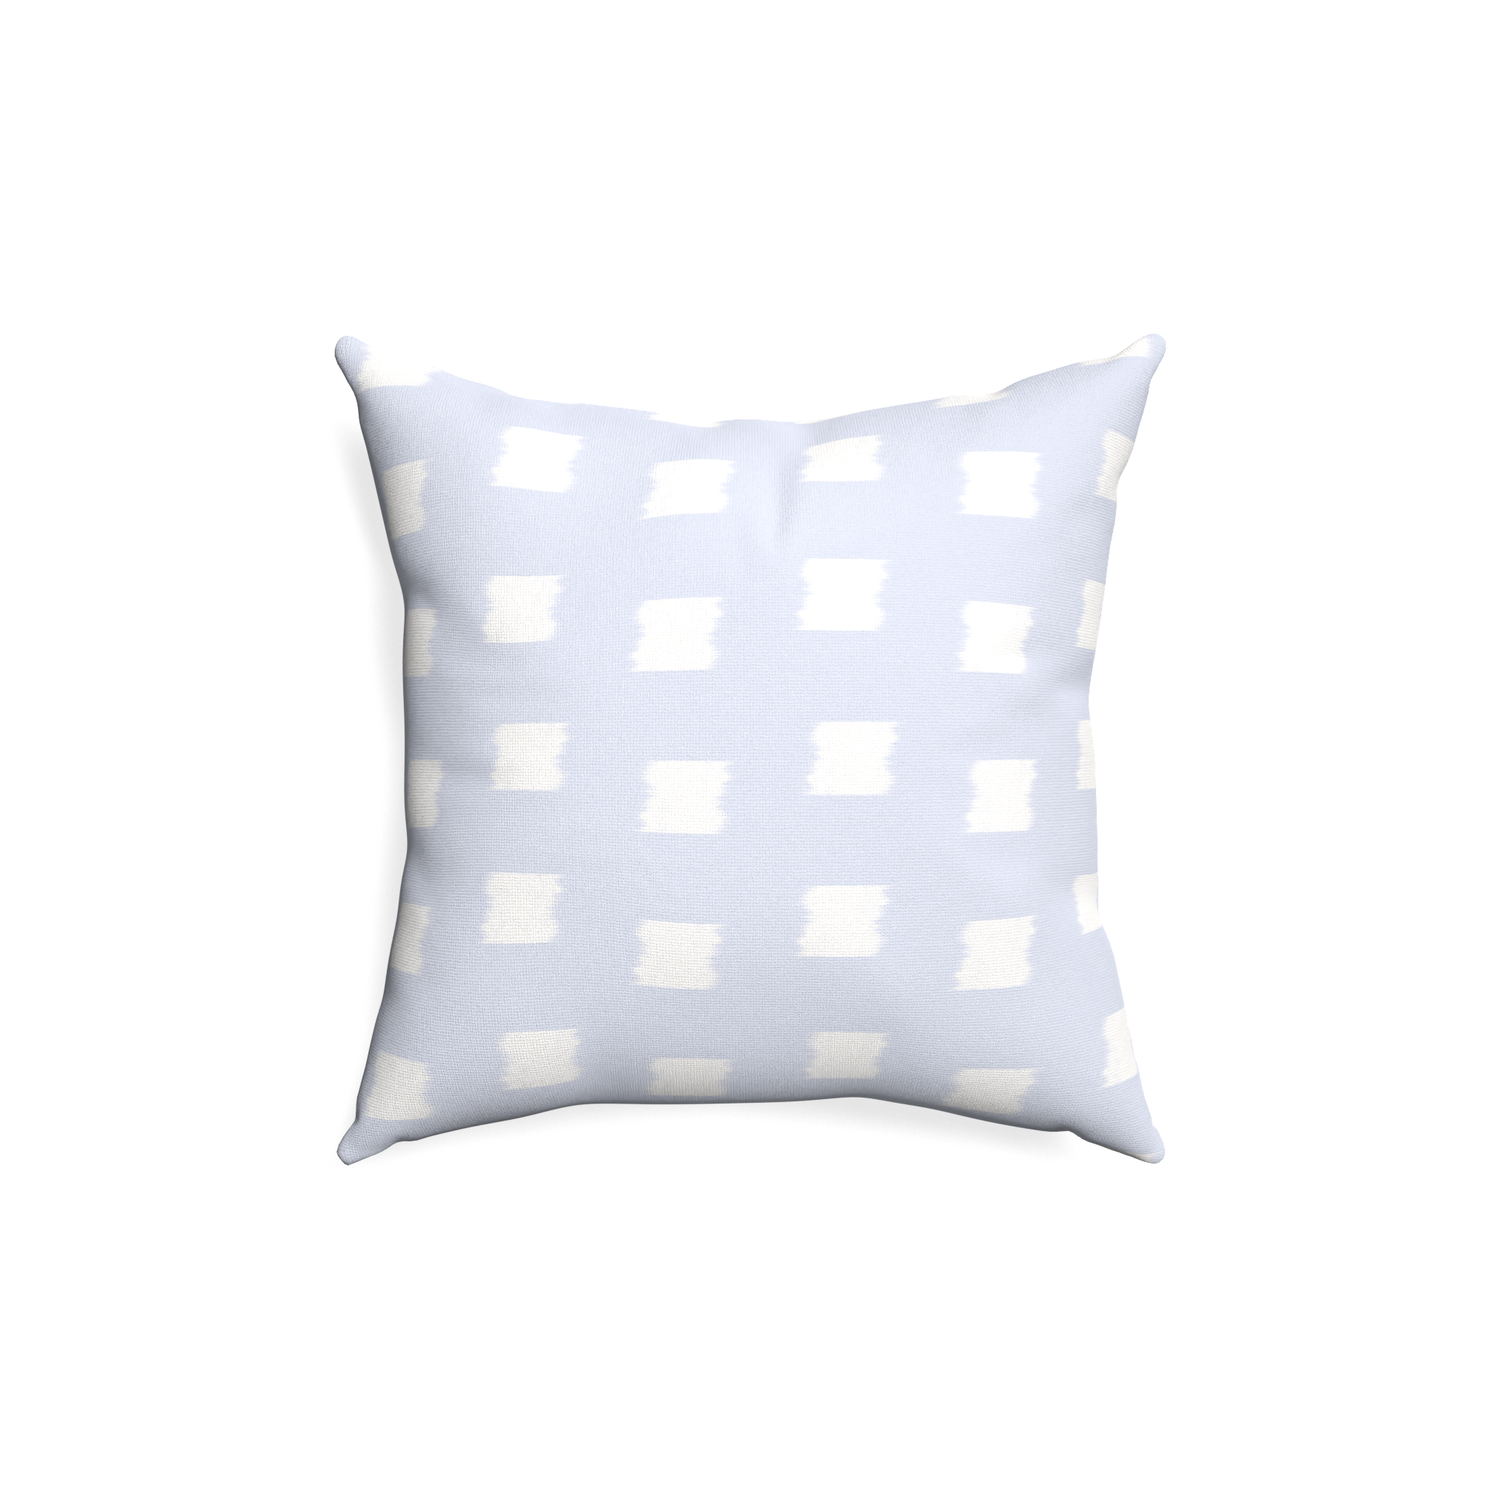 18-square denton custom sky blue patternpillow with none on white background